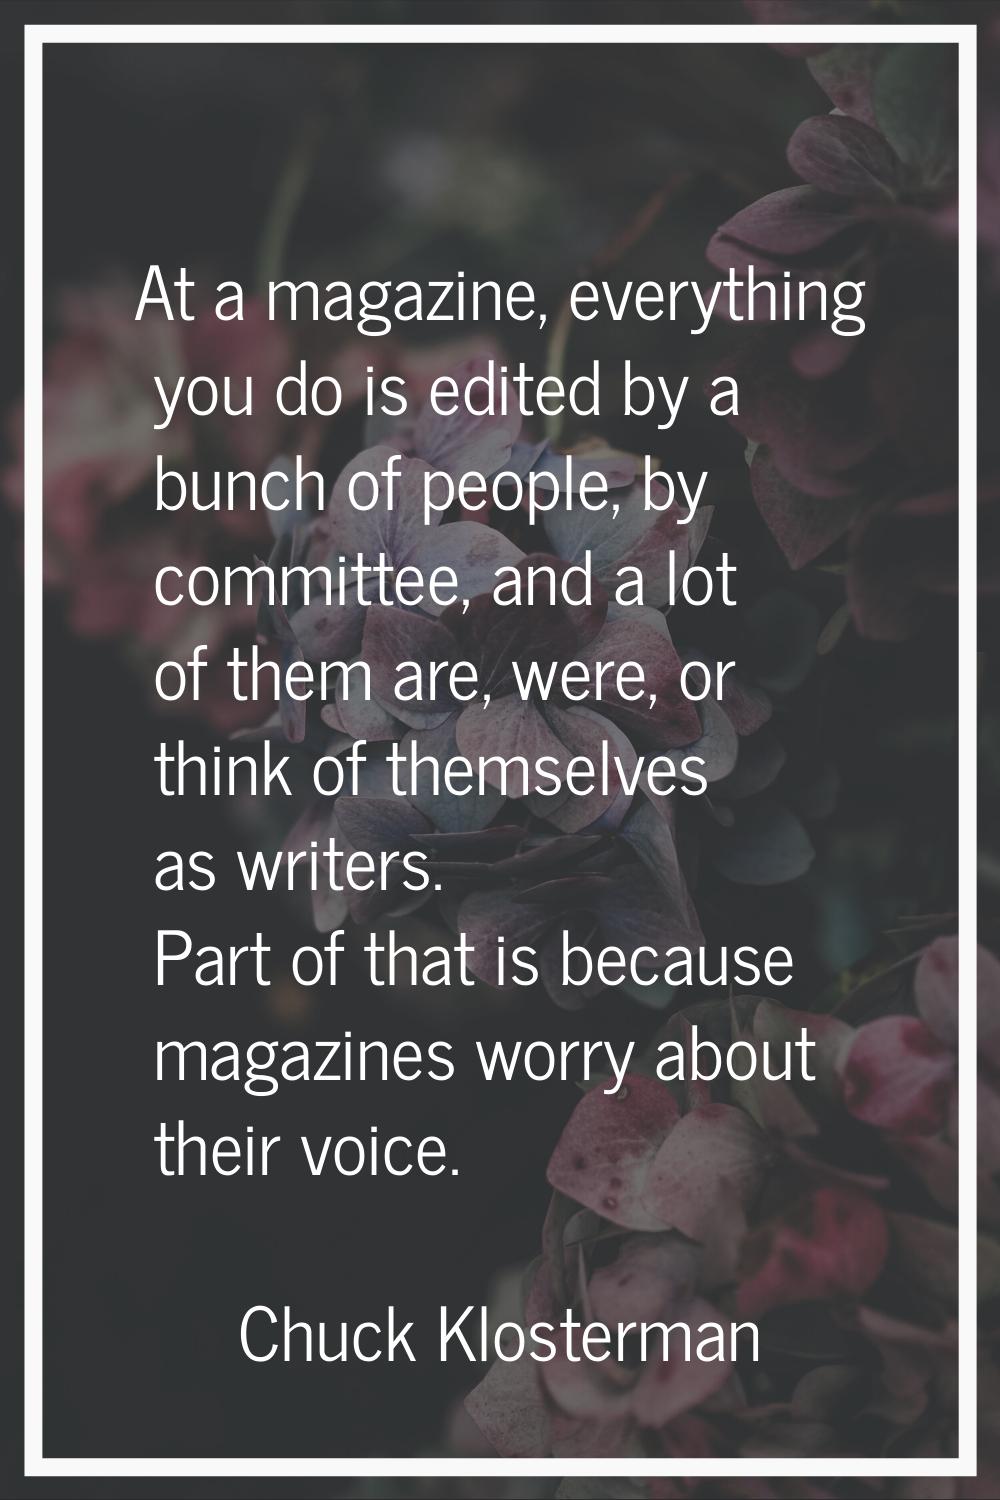 At a magazine, everything you do is edited by a bunch of people, by committee, and a lot of them ar